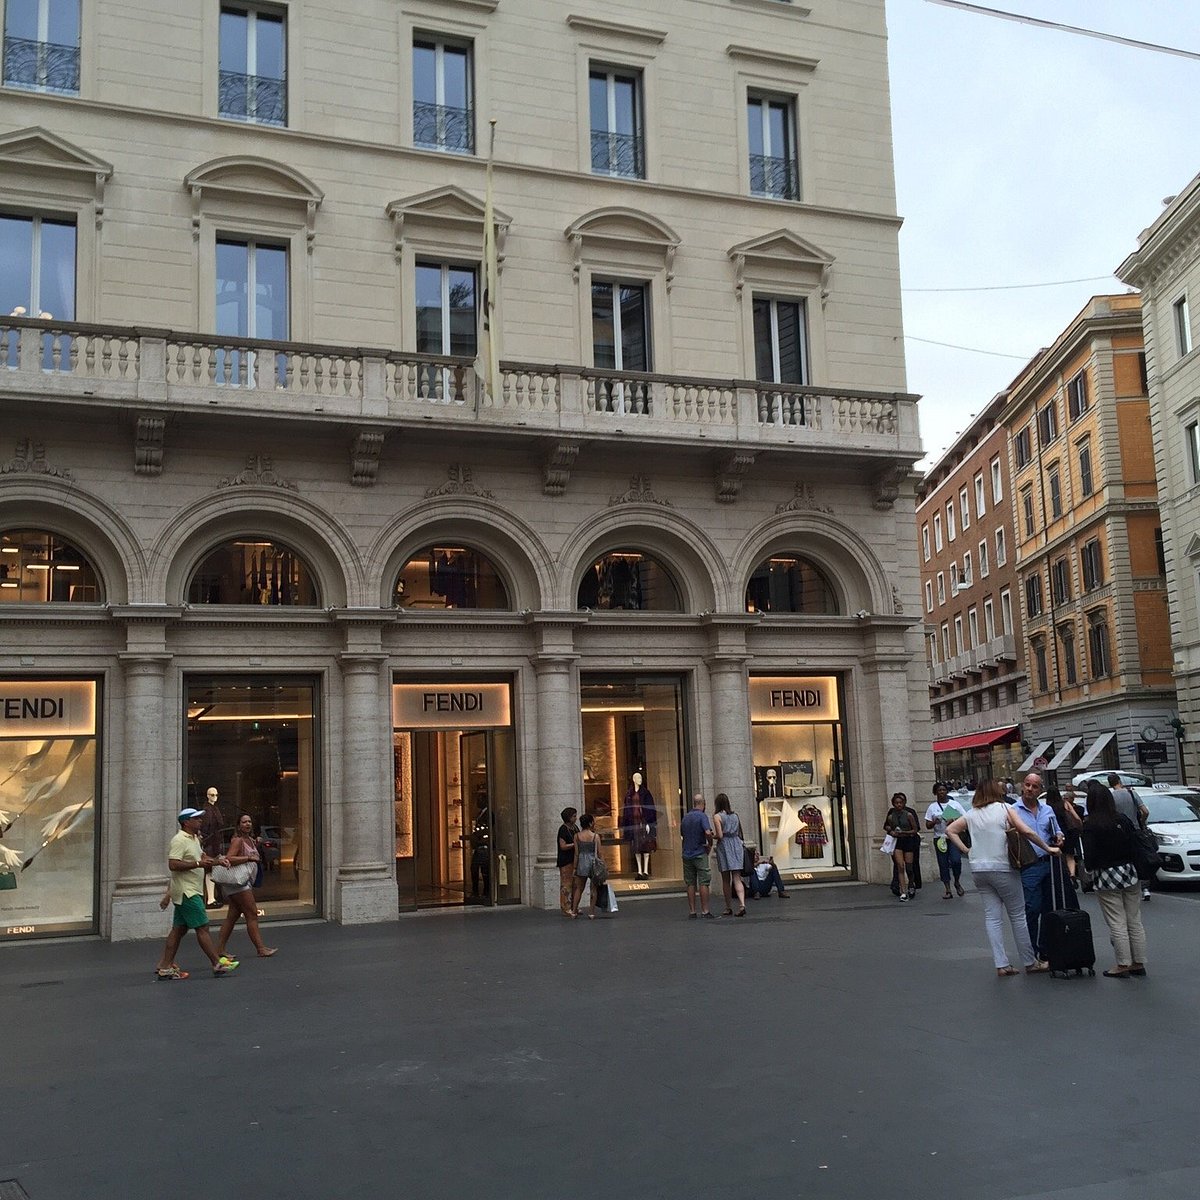 Shopping at the #fendi flagship store in #roma was fun and 💰💰💰💰#fy, fendi